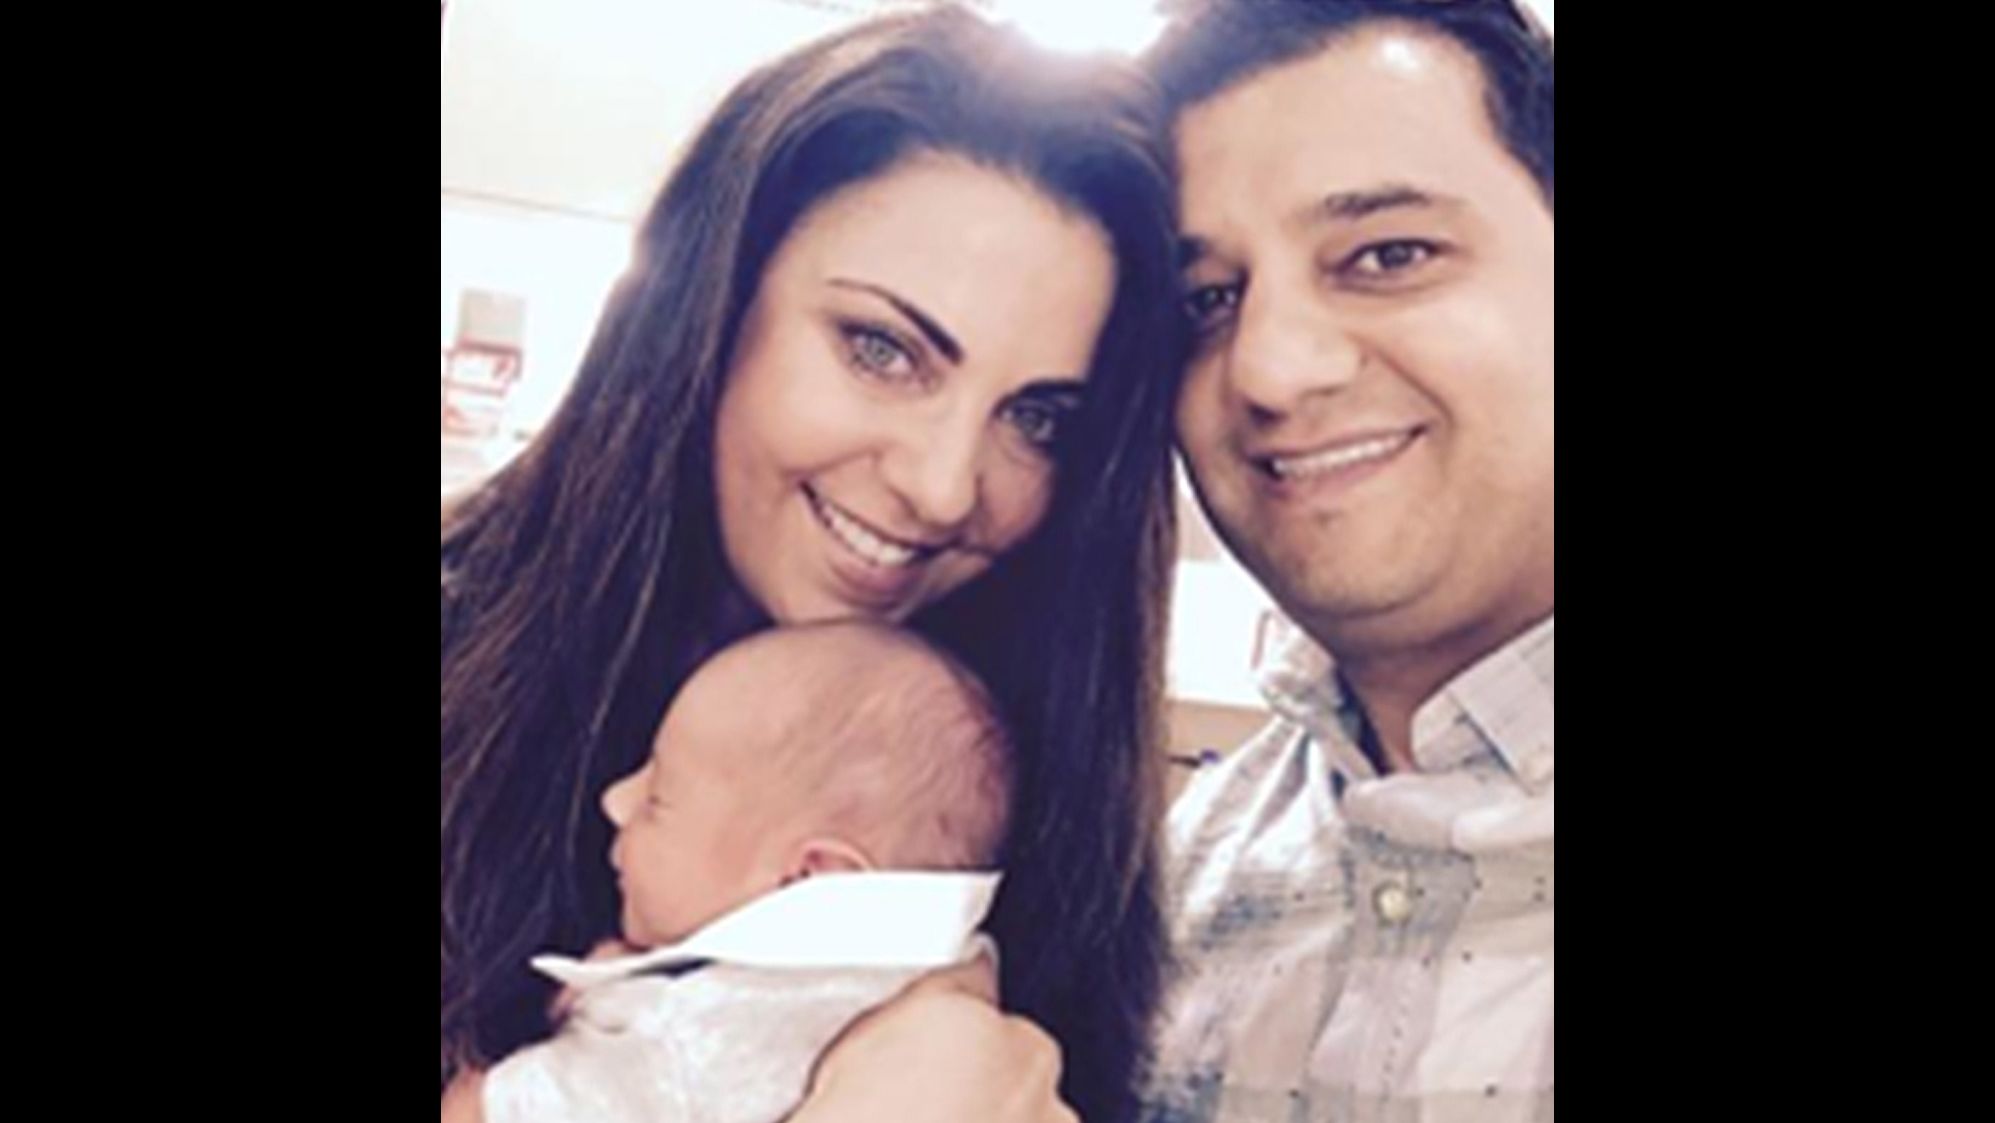 Haseeb and Christy Amireh with their son, Grayson.